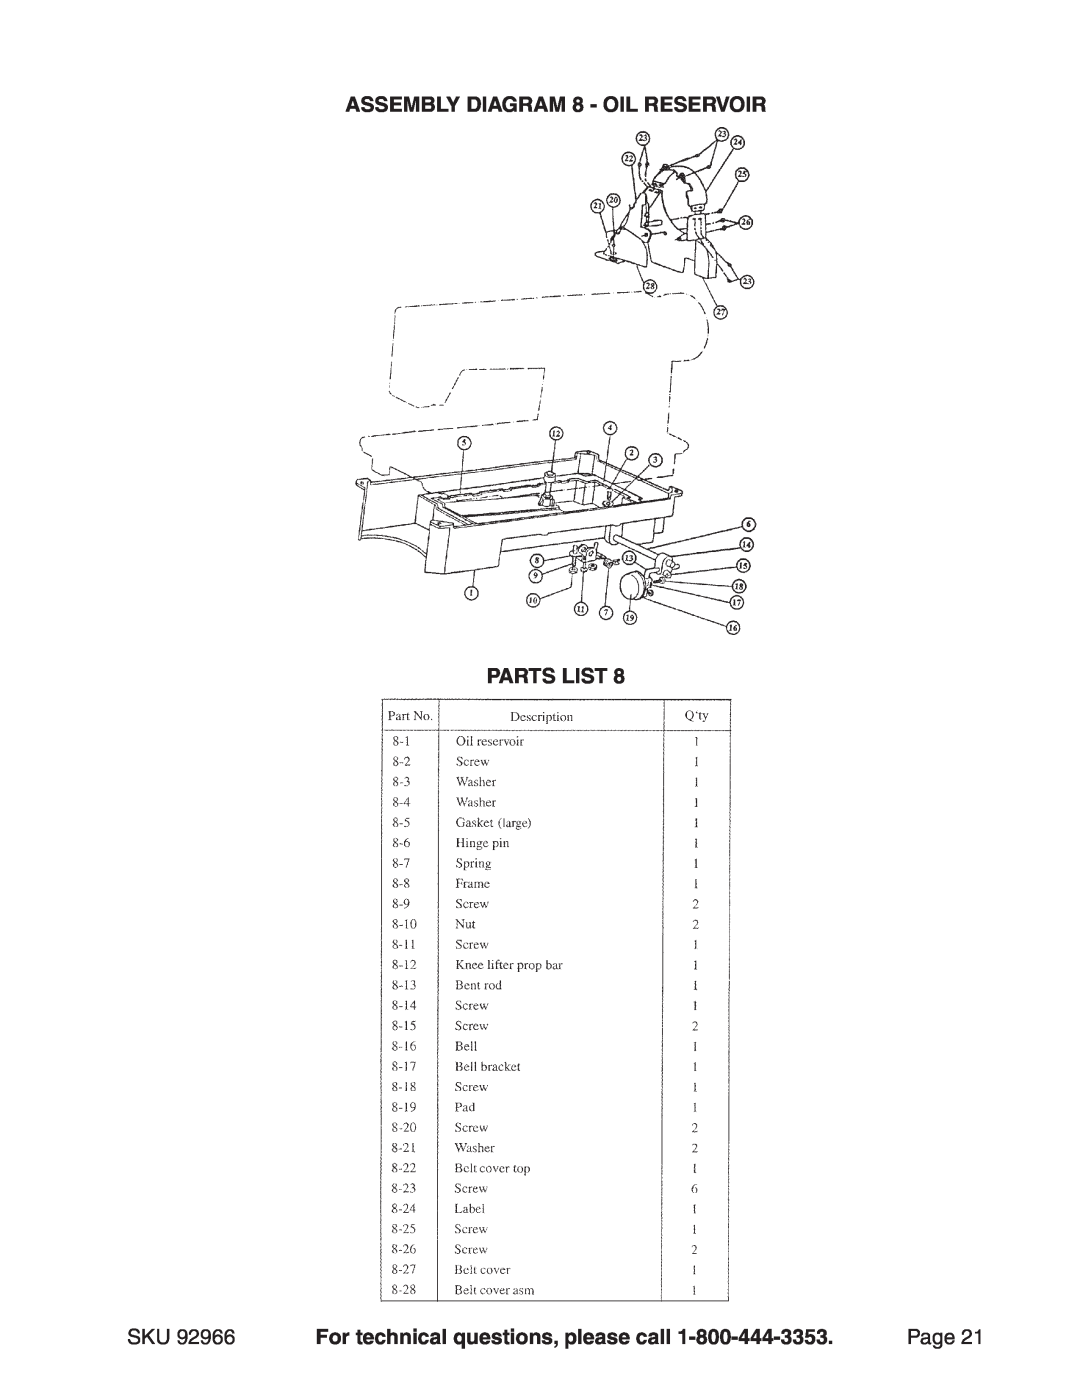 Harbor Freight Tools 92966 ASSEMBLY Diagram 8 - Oil reservoir, Parts List, For technical questions, please call, Page 